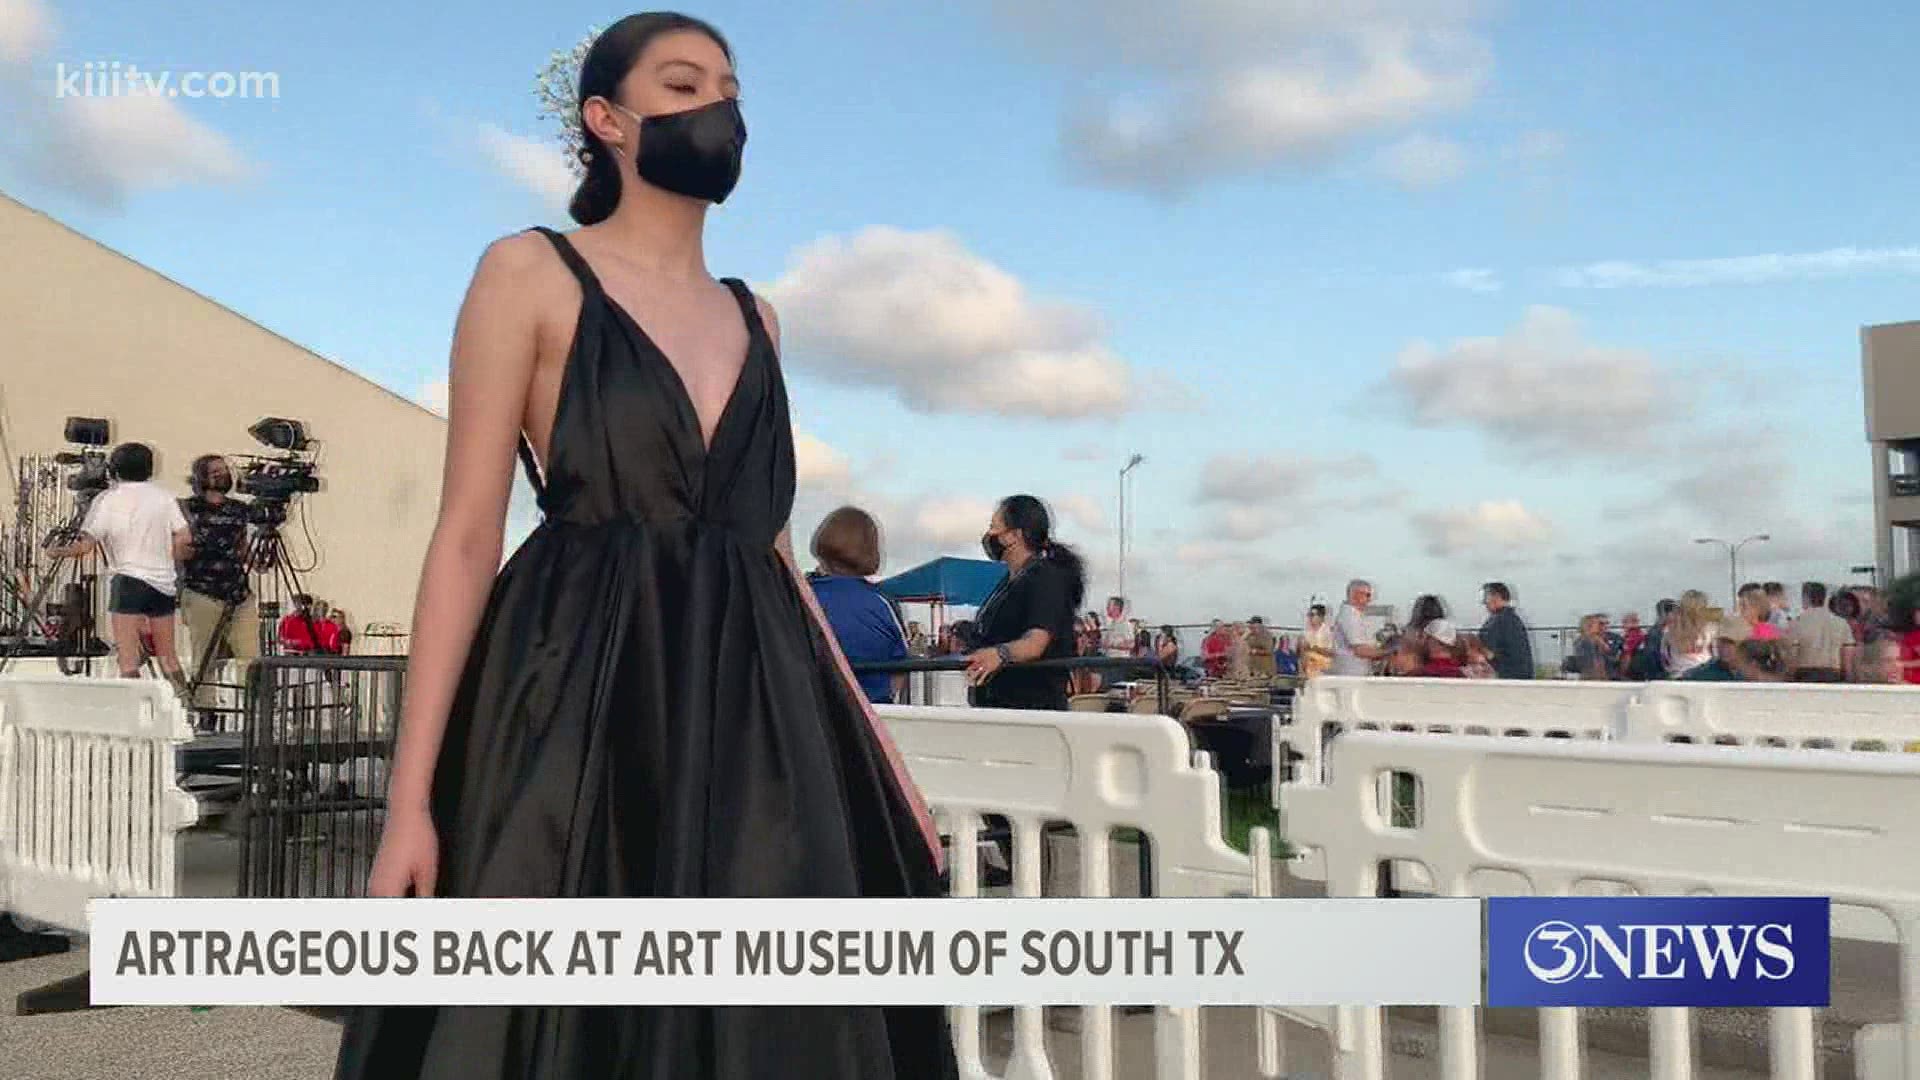 The work of 2020 Texas Fashion Designer Nick Perez made jaws drop along the runway.